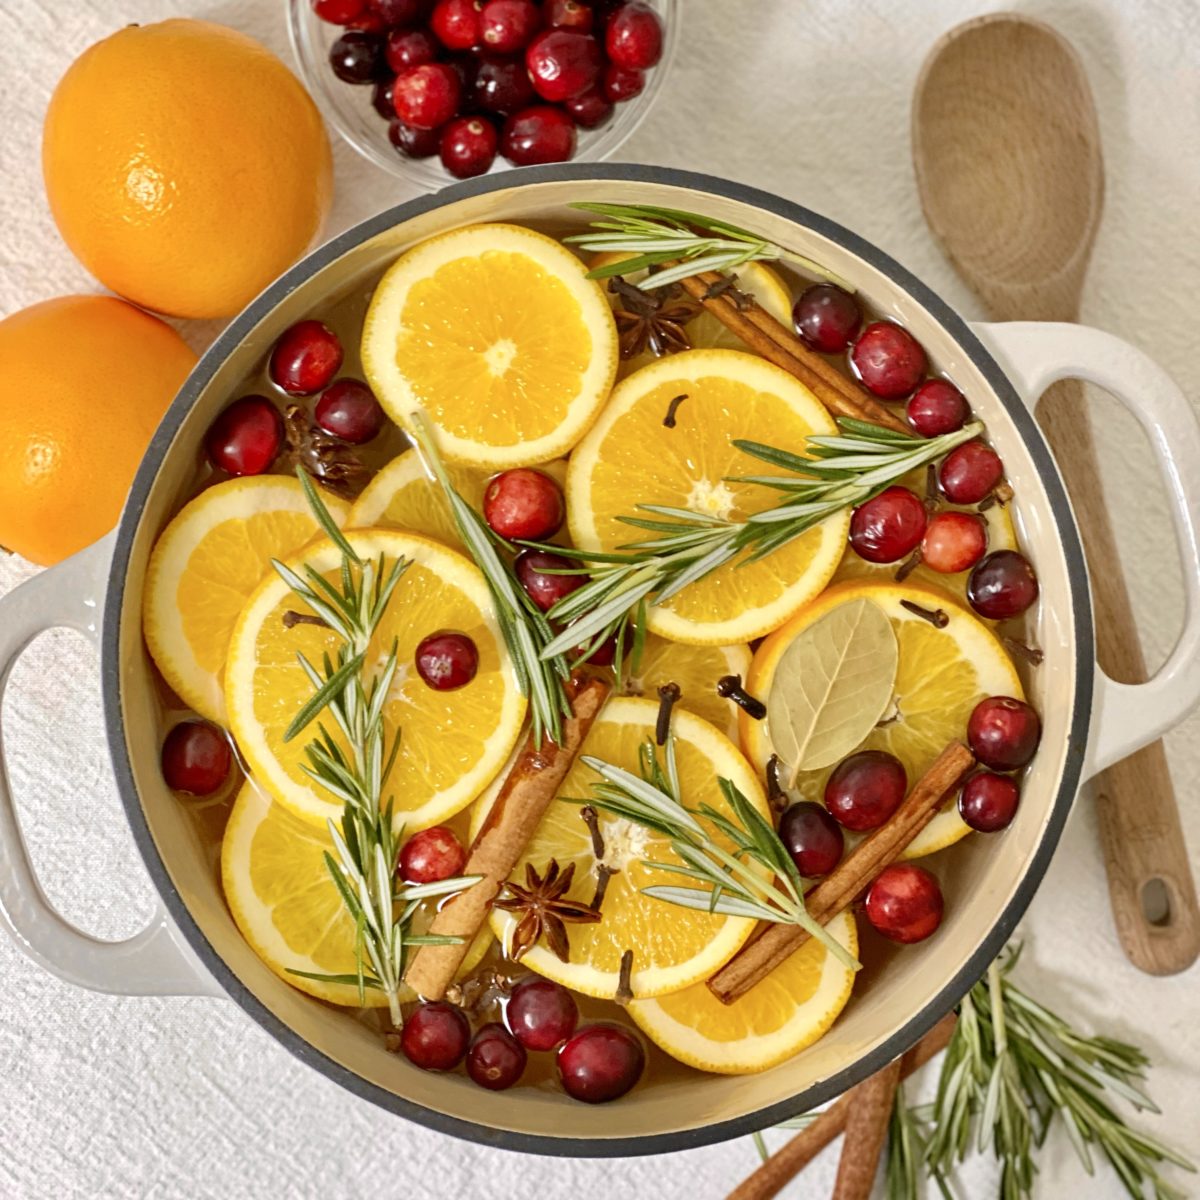 A DIY simmer pot with oranges, cinnamon sticks, cranberries, rosemary, and spices in a cast iron pot.